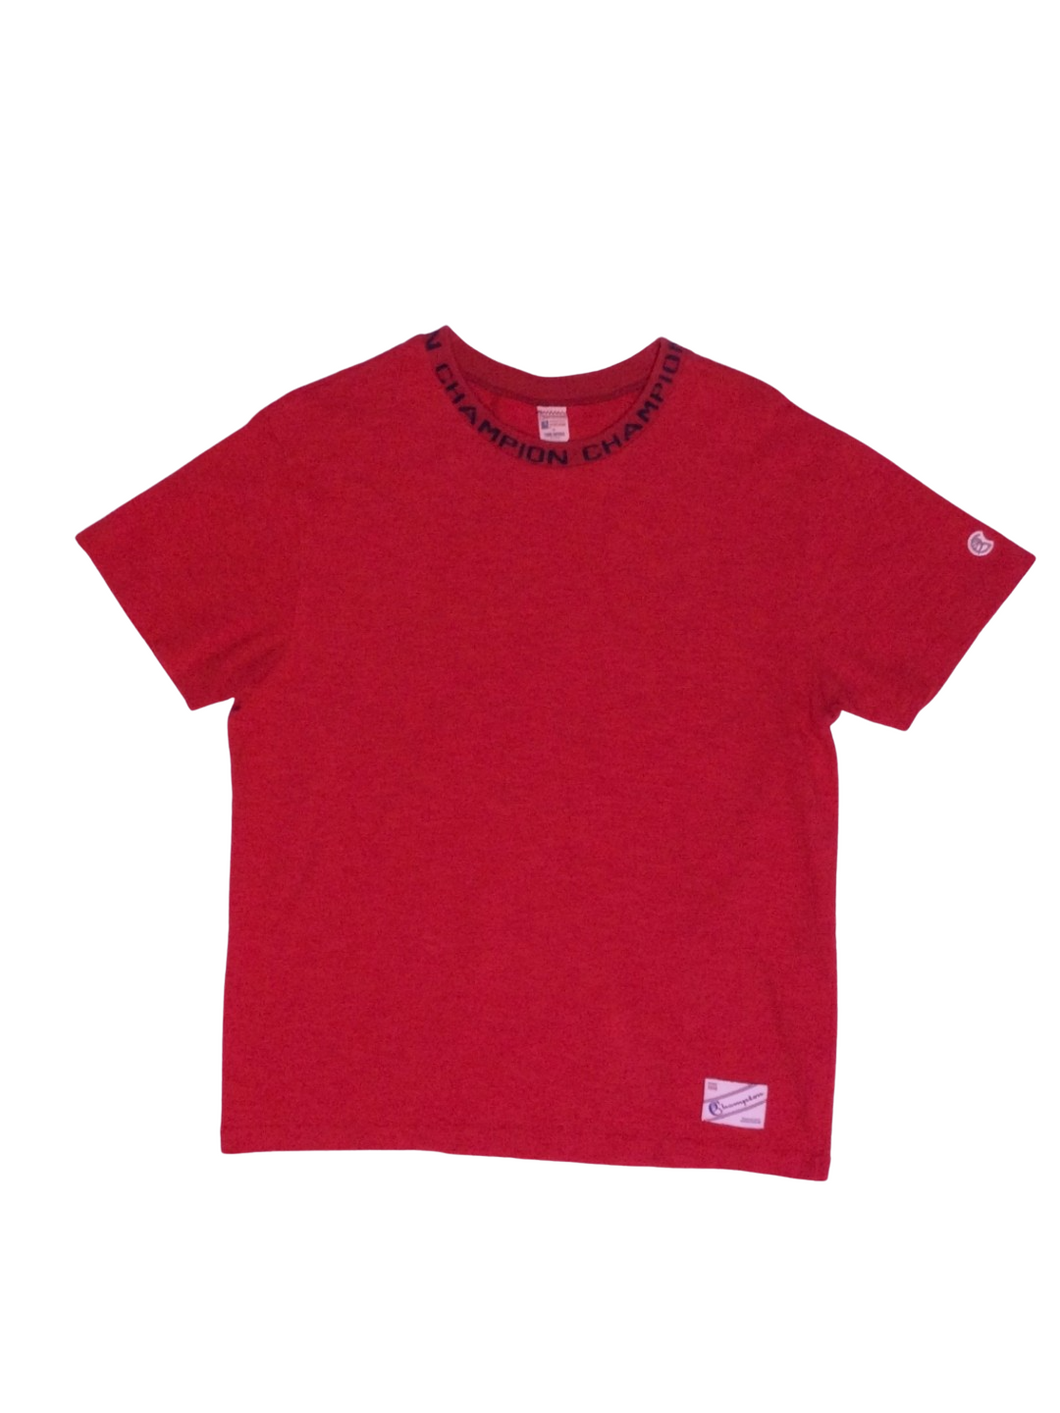 90s Red Champion T-Shirt - Size L